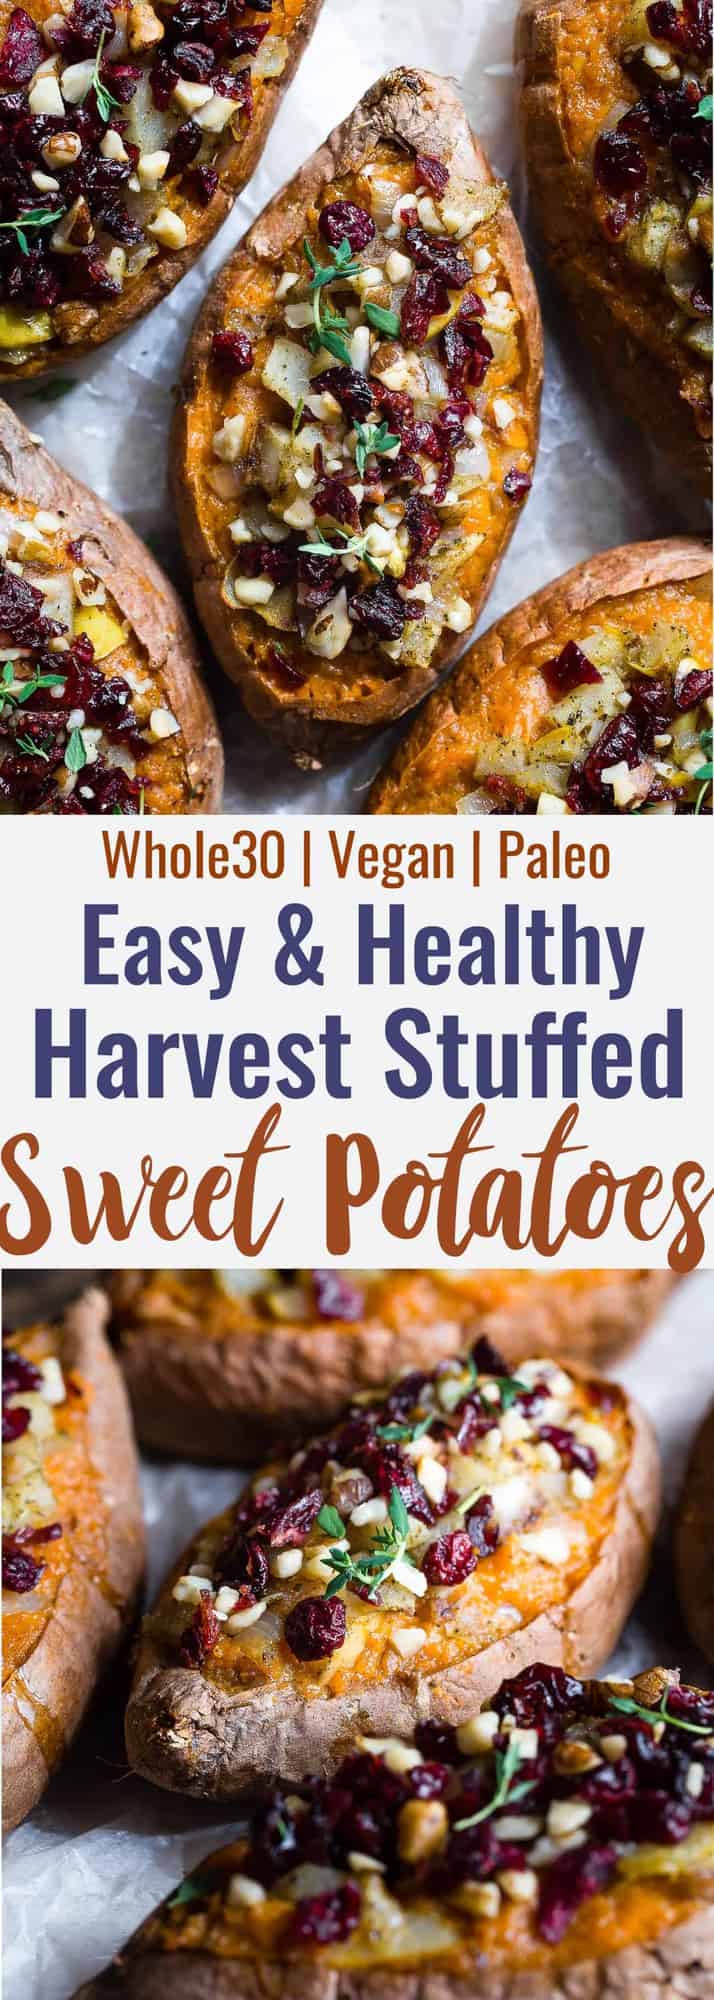 Harvest Paleo Vegan Stuffed Sweet Potatoes - These healthy stuffed sweet potatoes are loaded with cozy, spicy-sweet fall flavors like cranberries, walnuts and pears and are SO easy to make! Gluten, grain and dairy free and whole30 compliant too! | #Foodfaithfitness | #Paleo #Vegan #Glutenfree #Healthy #Whole30